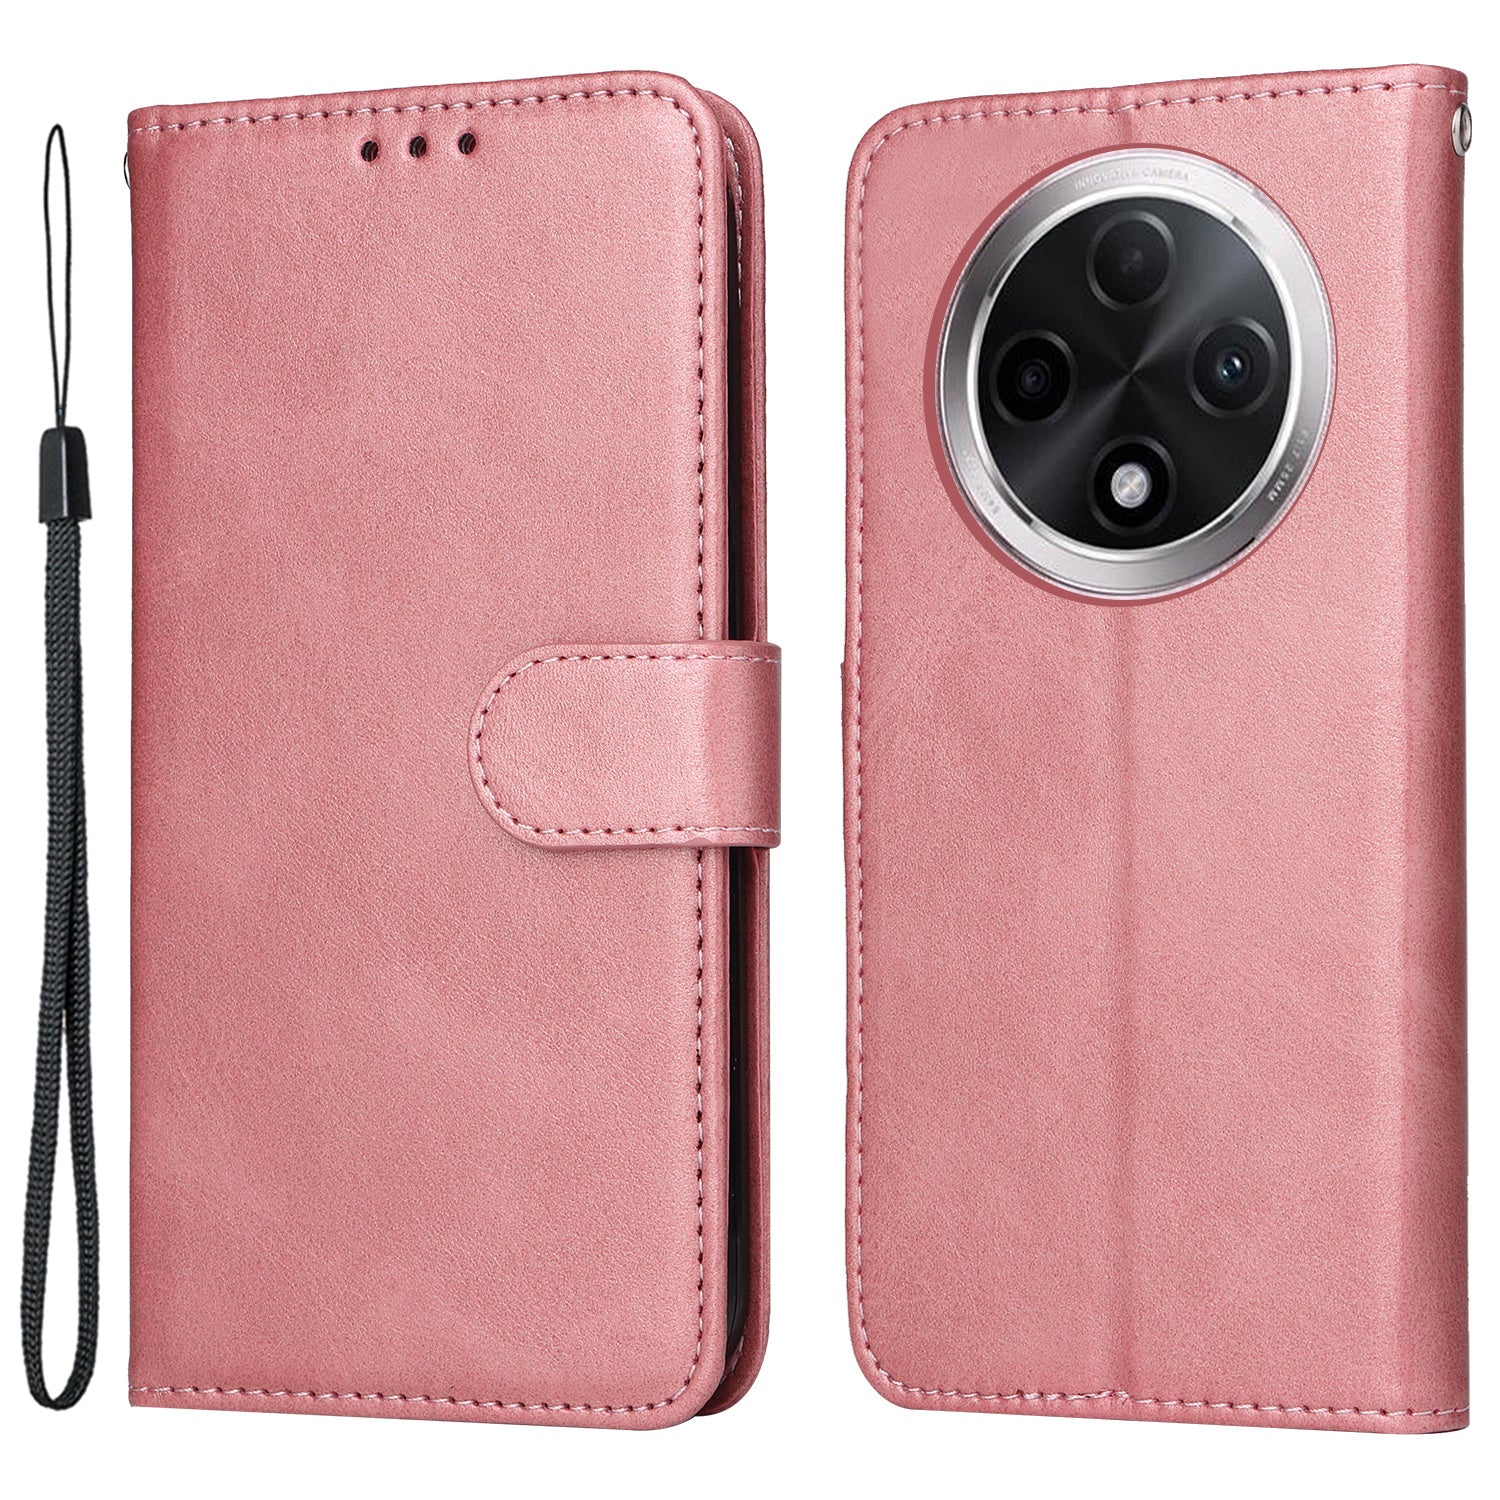 For Oppo A3 Pro 5G Case Leather Viewing Stand Mobile Phone Cover with Wrist Strap - Pink